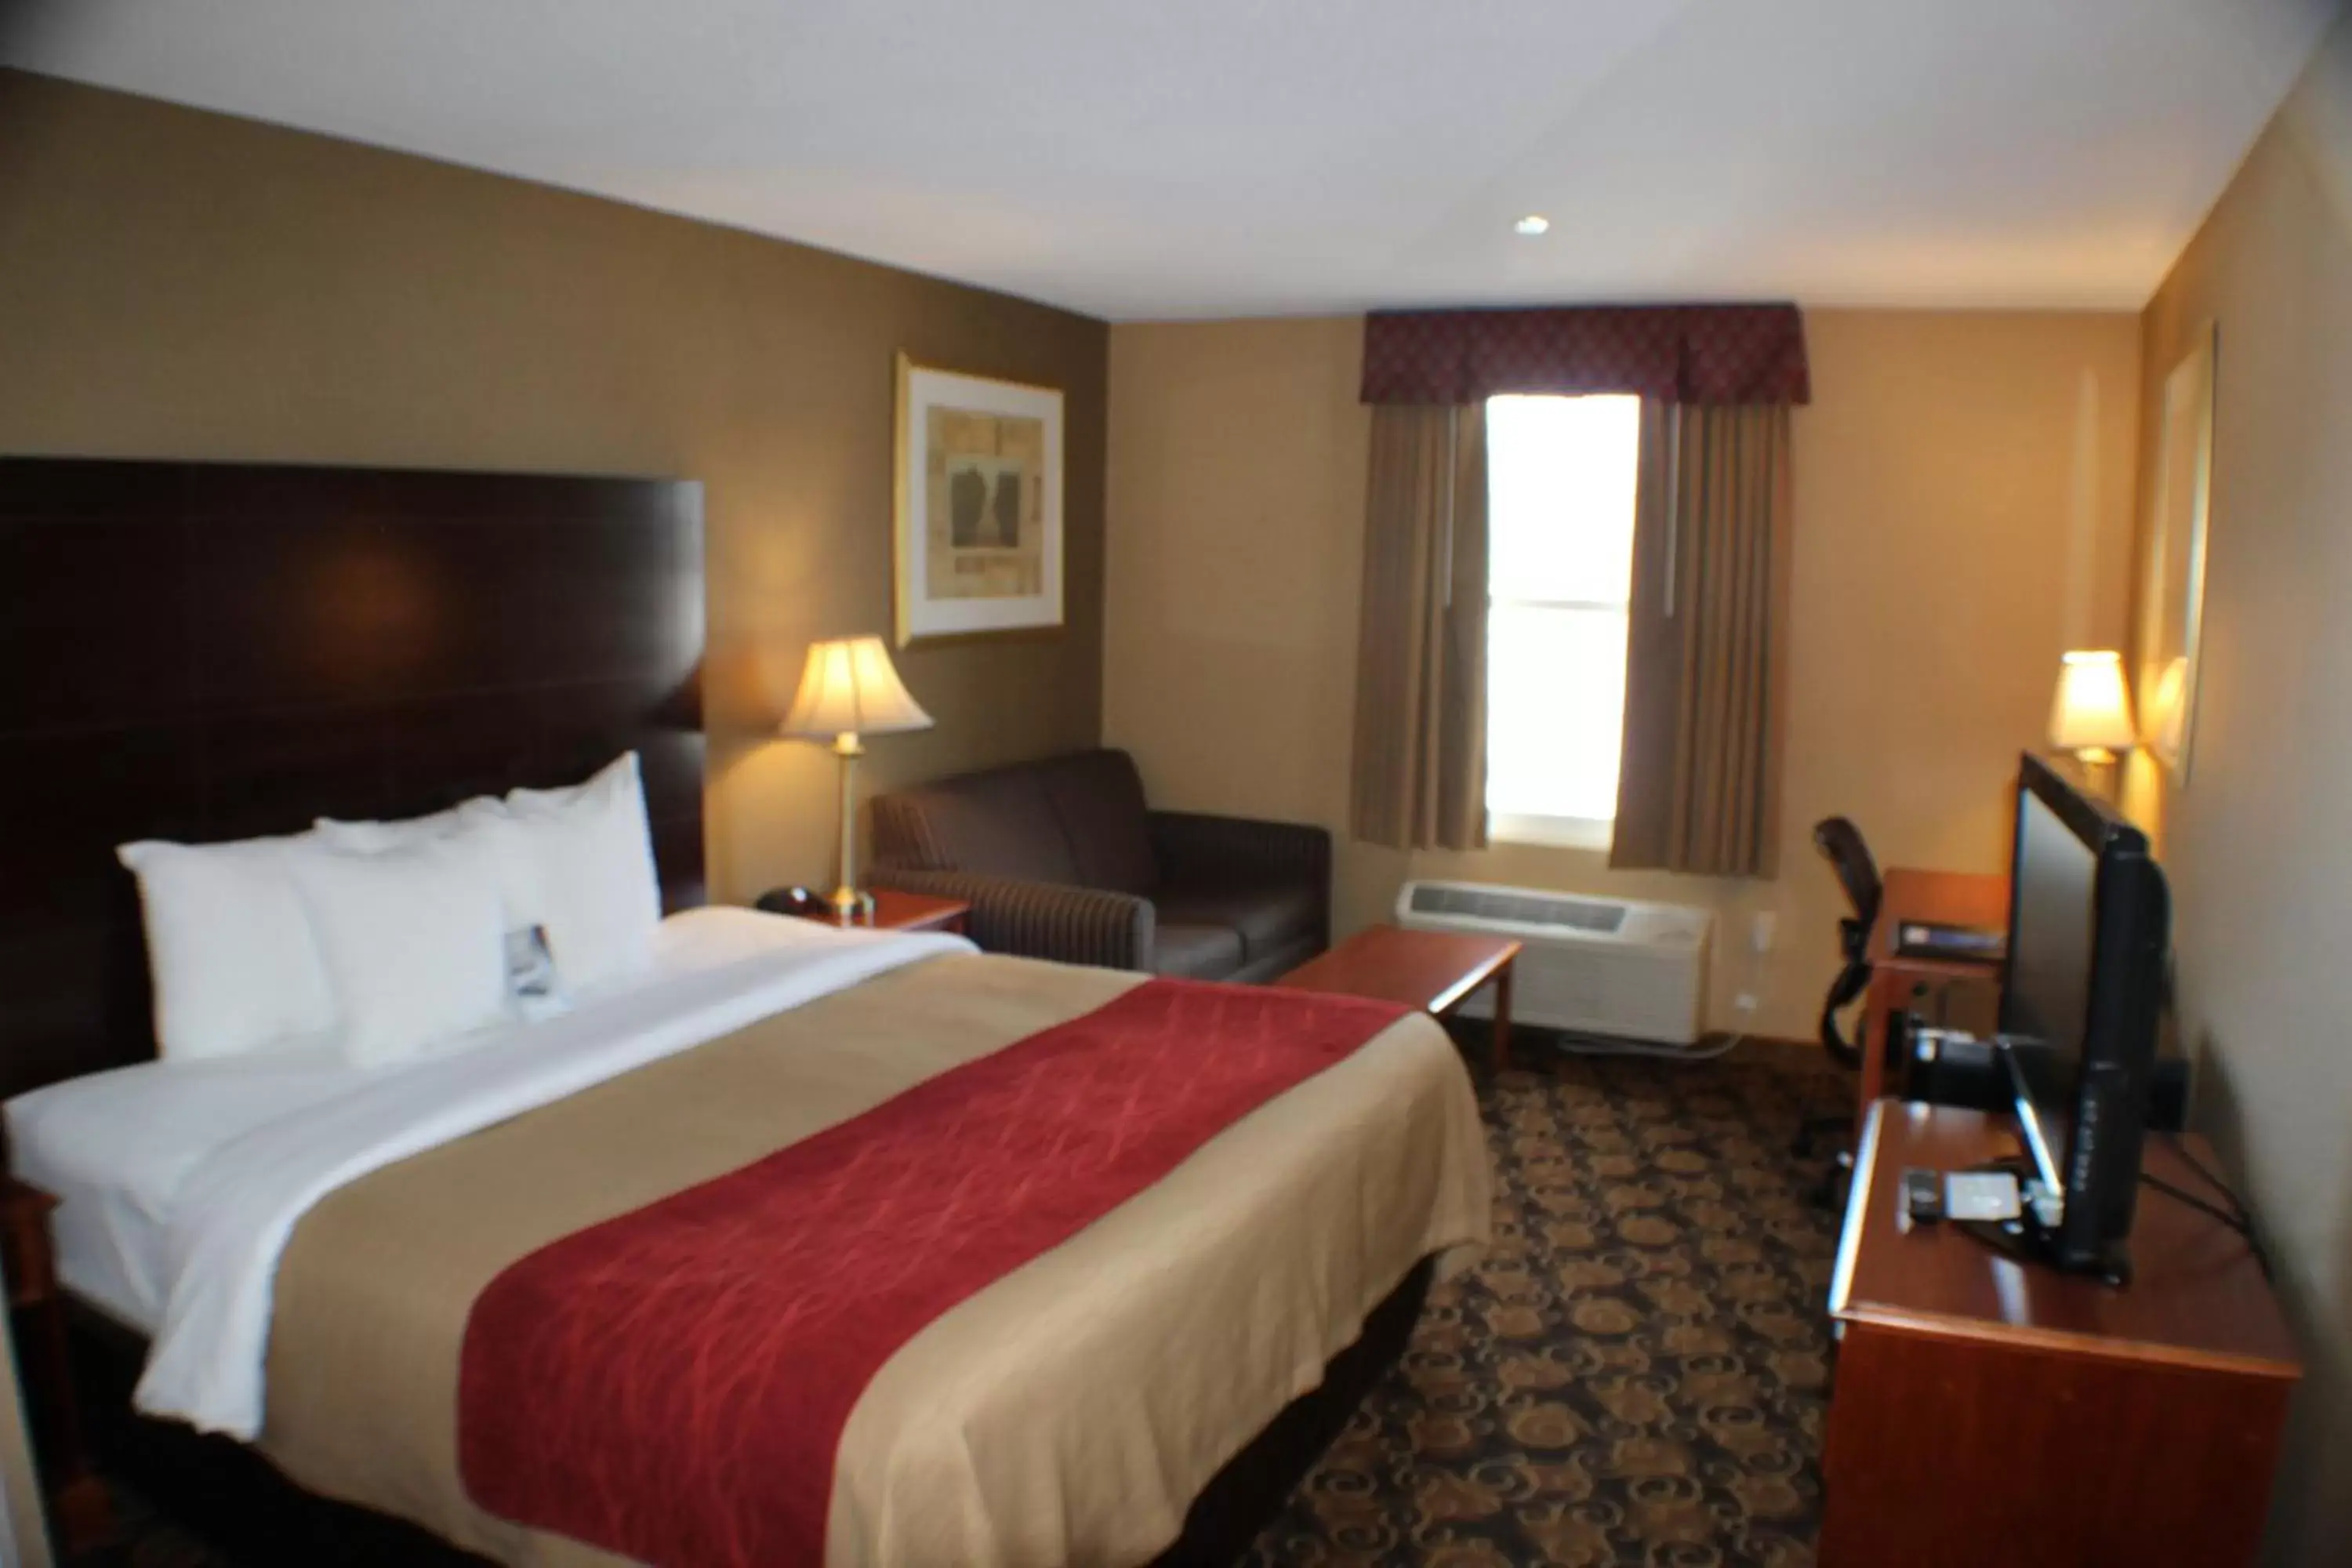 Standard King Room with Sofa Bed - Shower Only in Comfort Inn Rockland - Boston